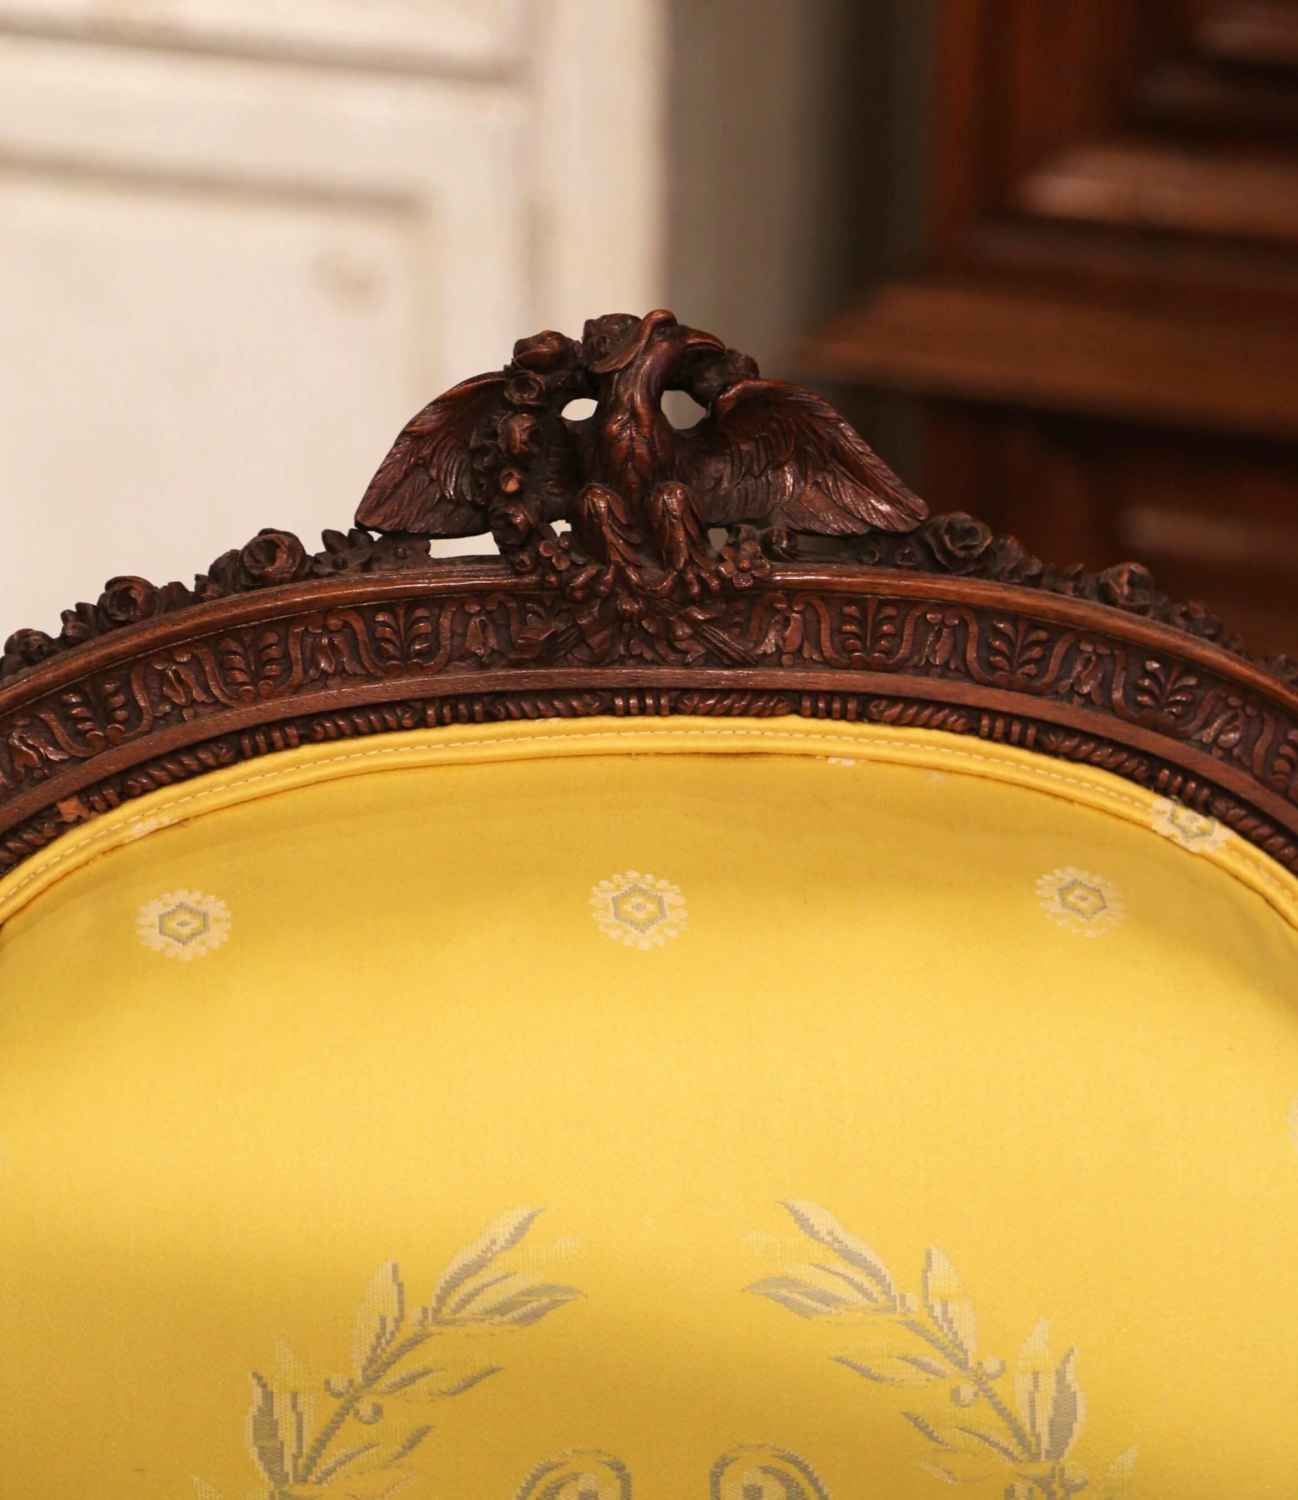 Antique French Louis XVI Style Carved Walnut Armchairs Available For  Immediate Sale At Sotheby's